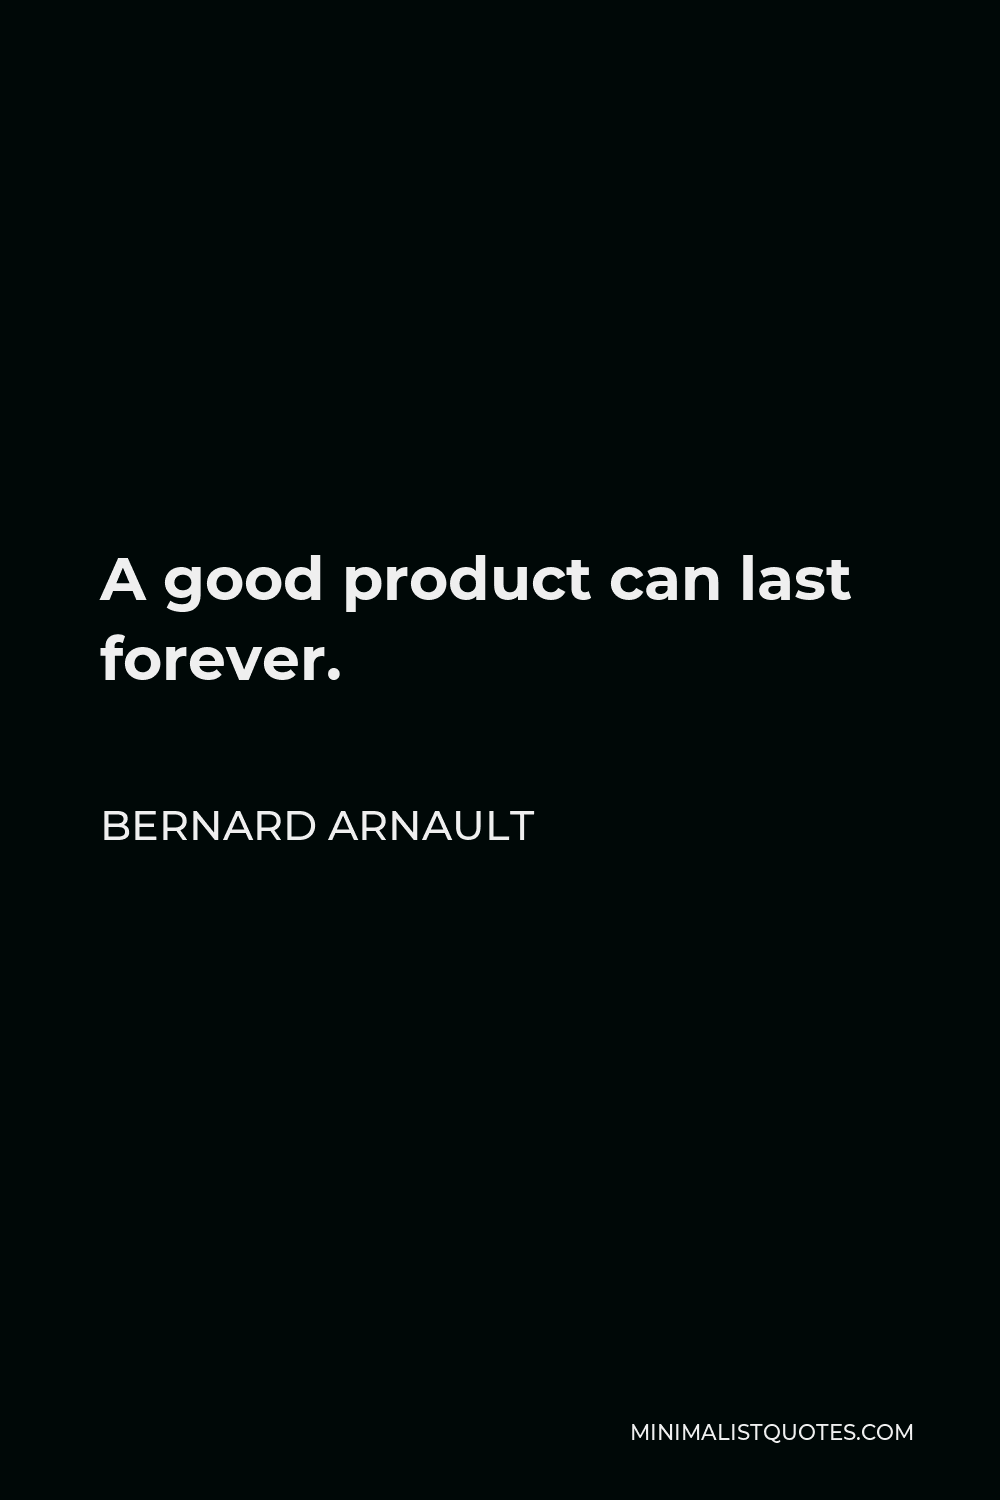 Bernard Arnault Quote - A good product can last forever.